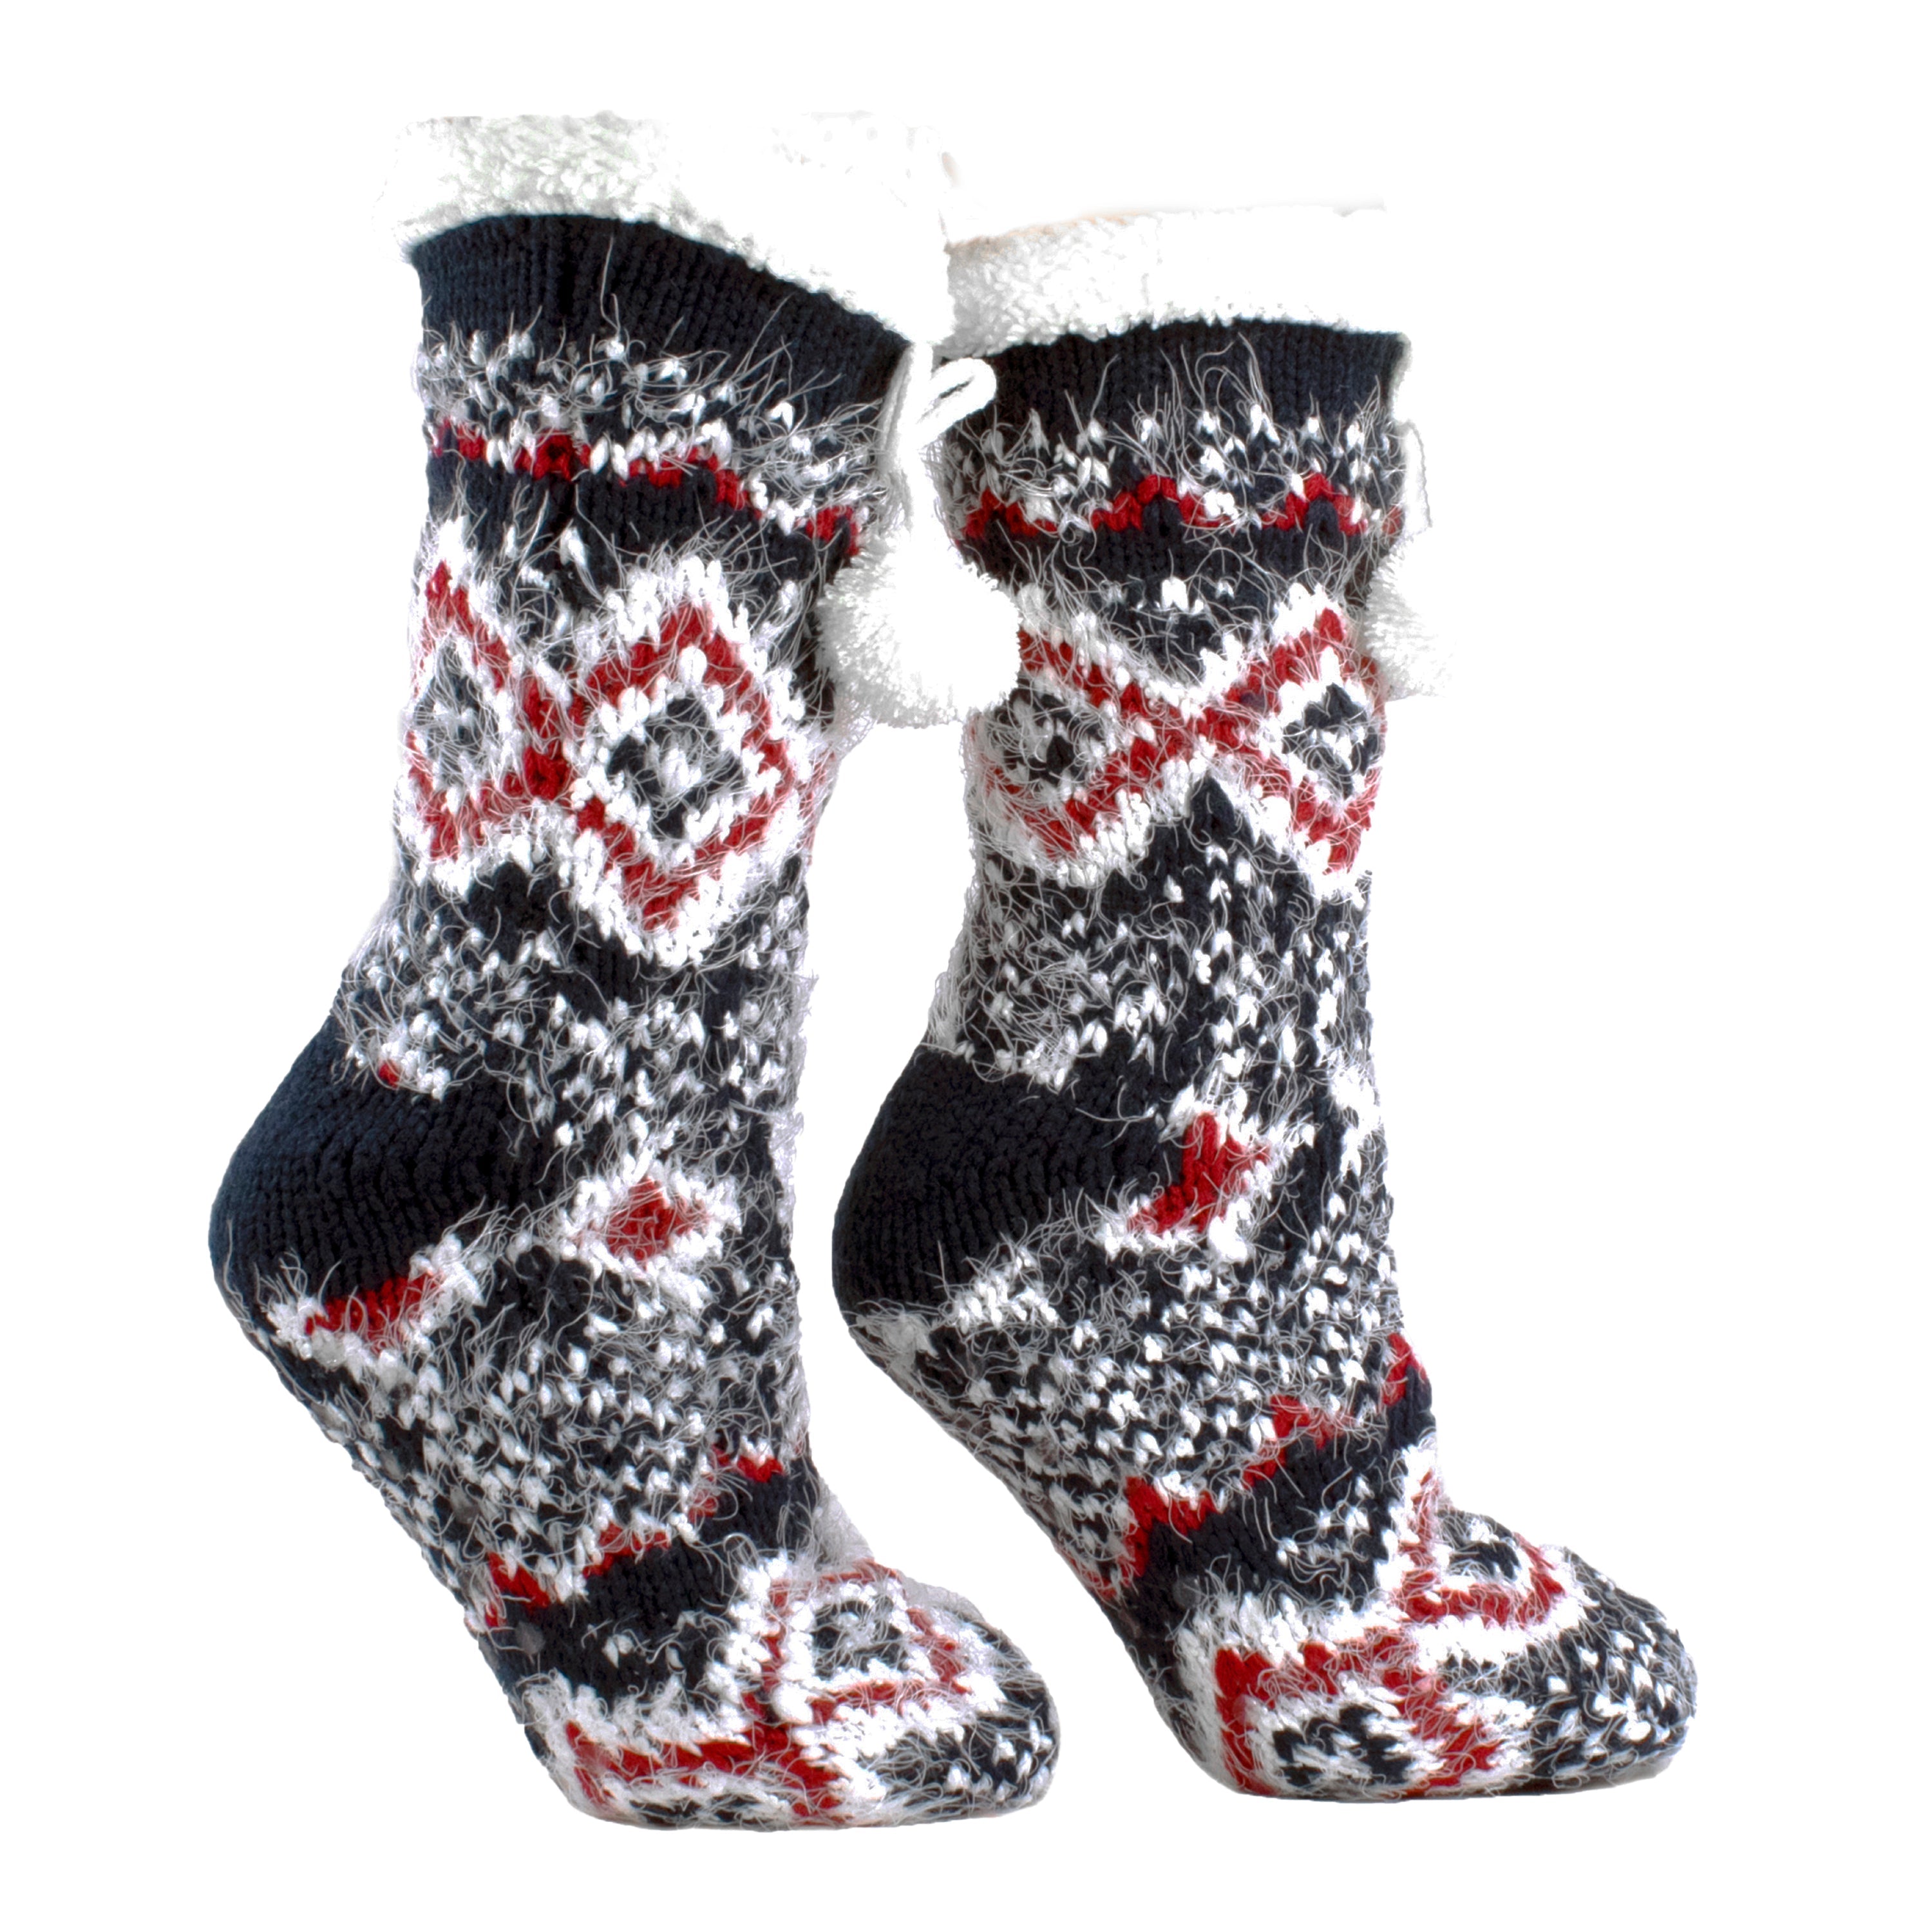 Snow Falls Lounge Socks With Shea Butter Infused